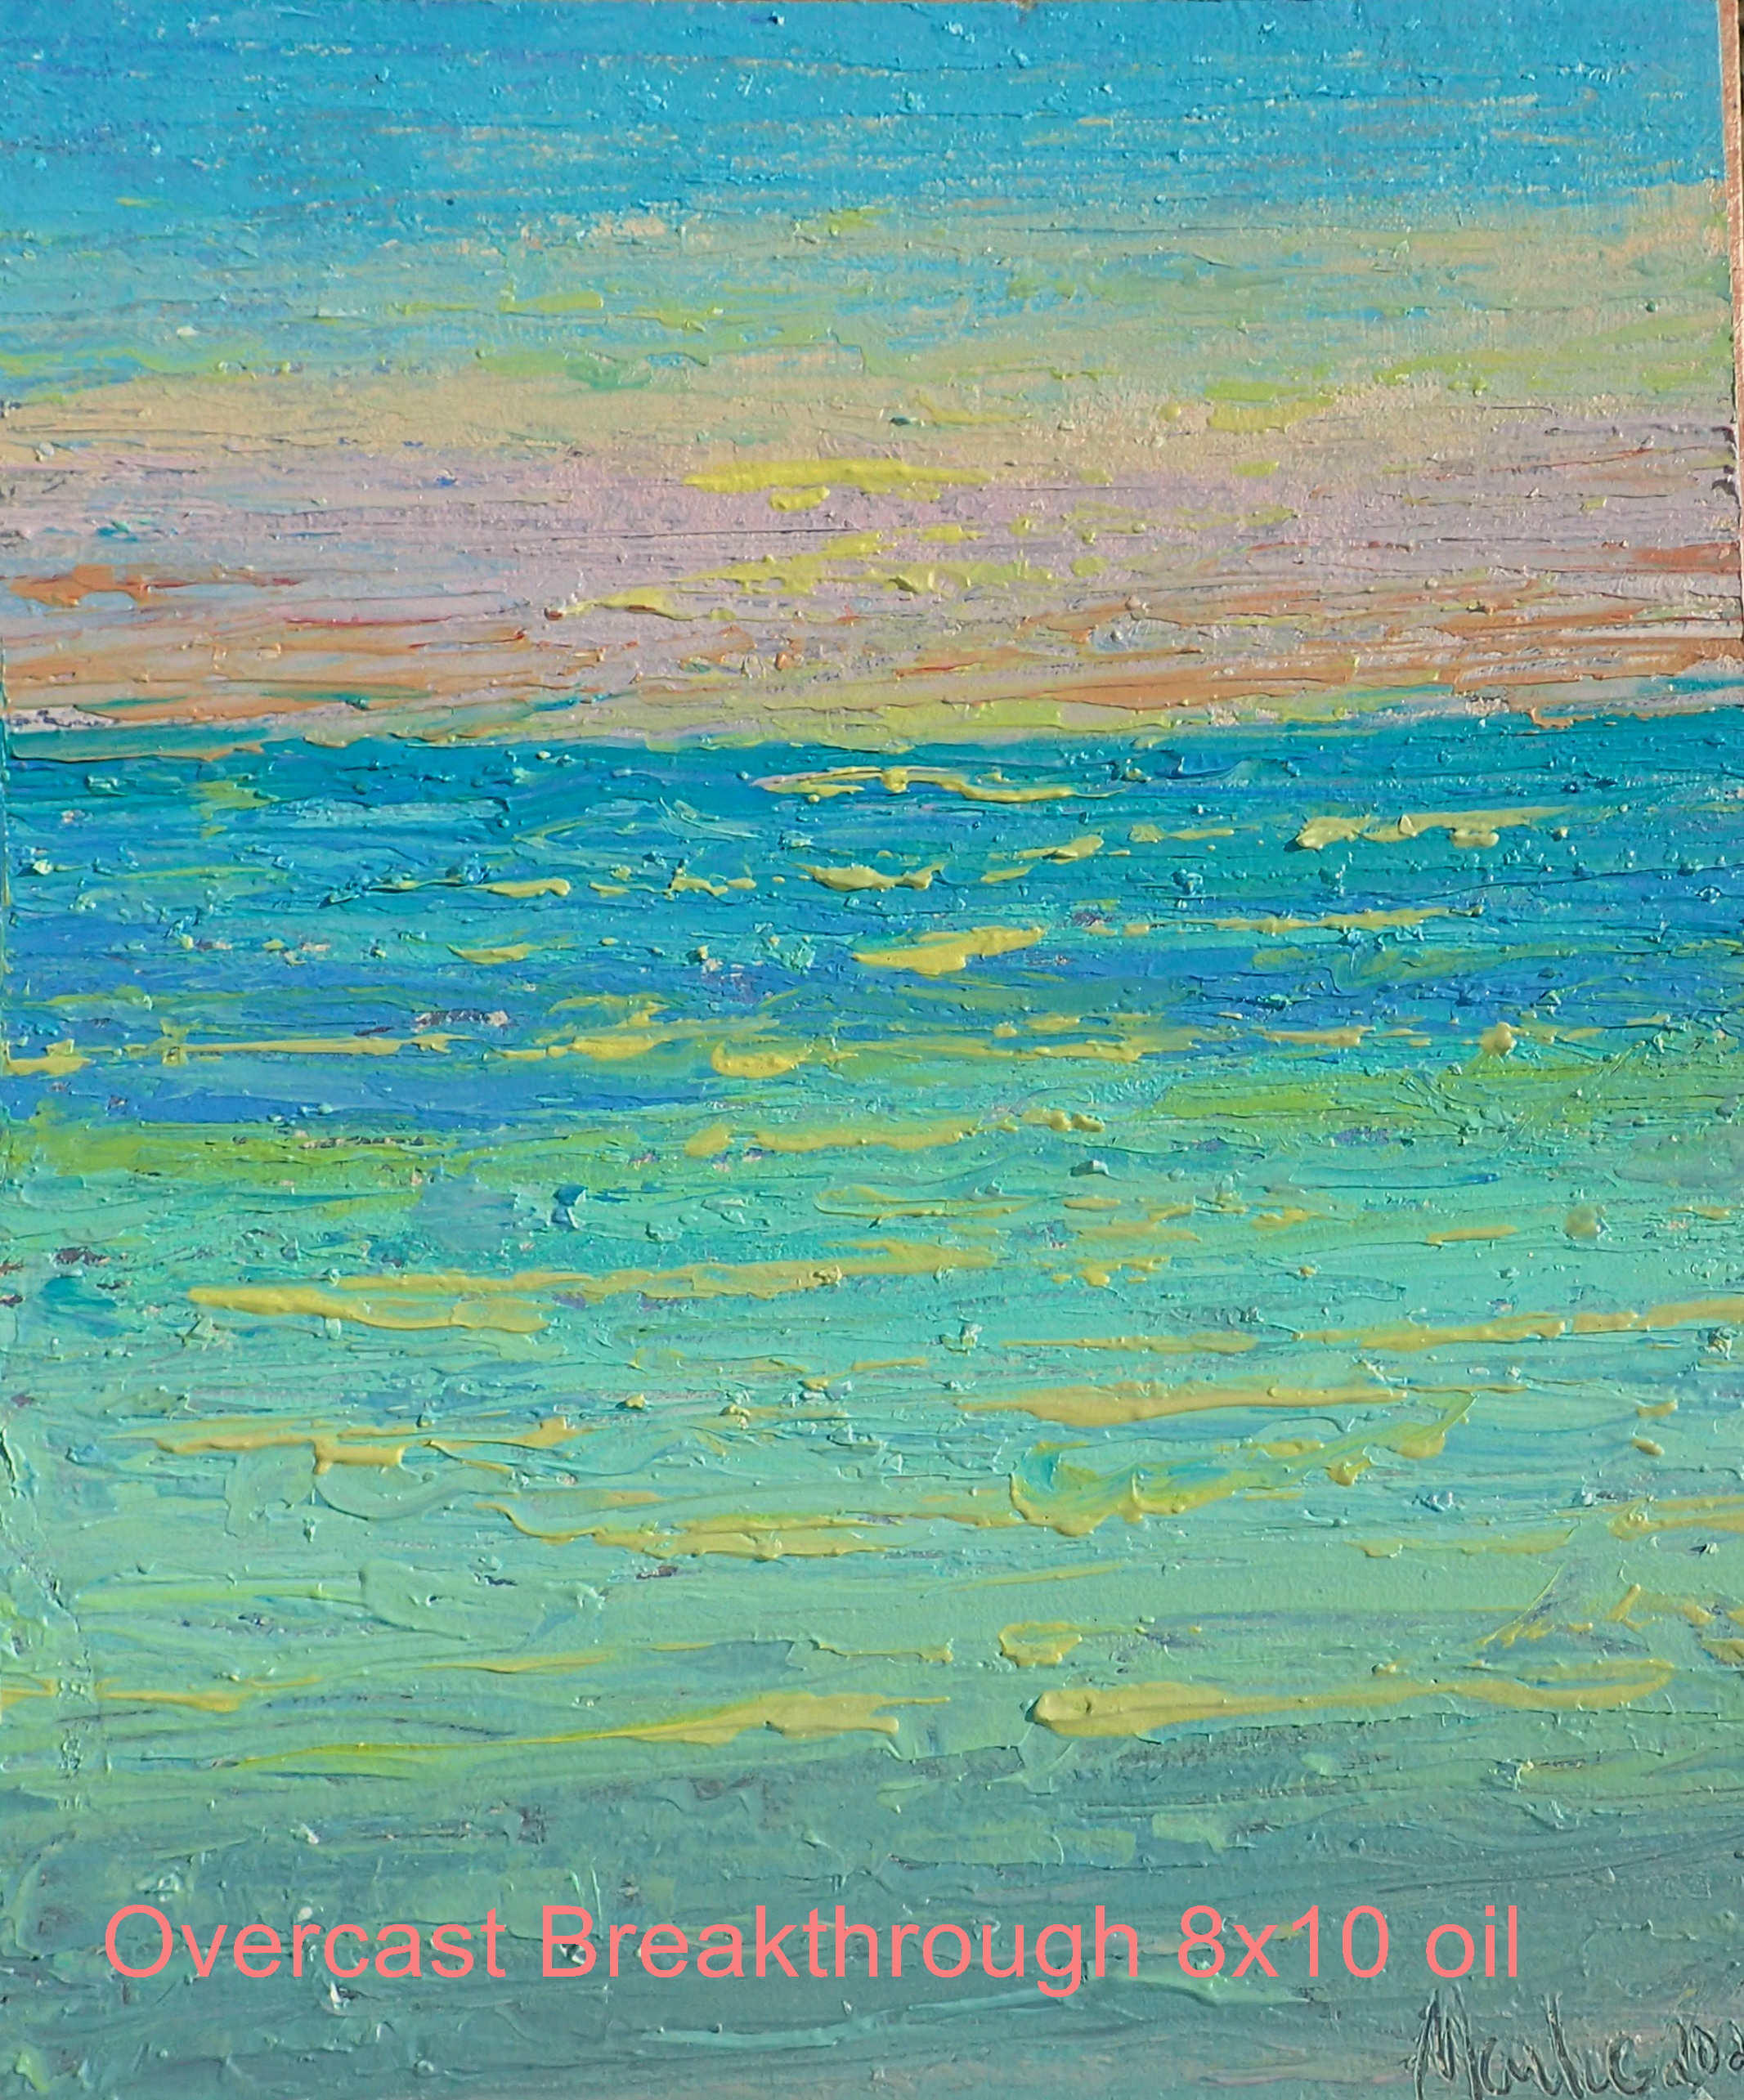 Original Oil on linen canvas 8x10   Palette knife original oil painting on an early morning awakening to a sky very overcast.  The beach and tropical water begins to light up with the sun breaking thr